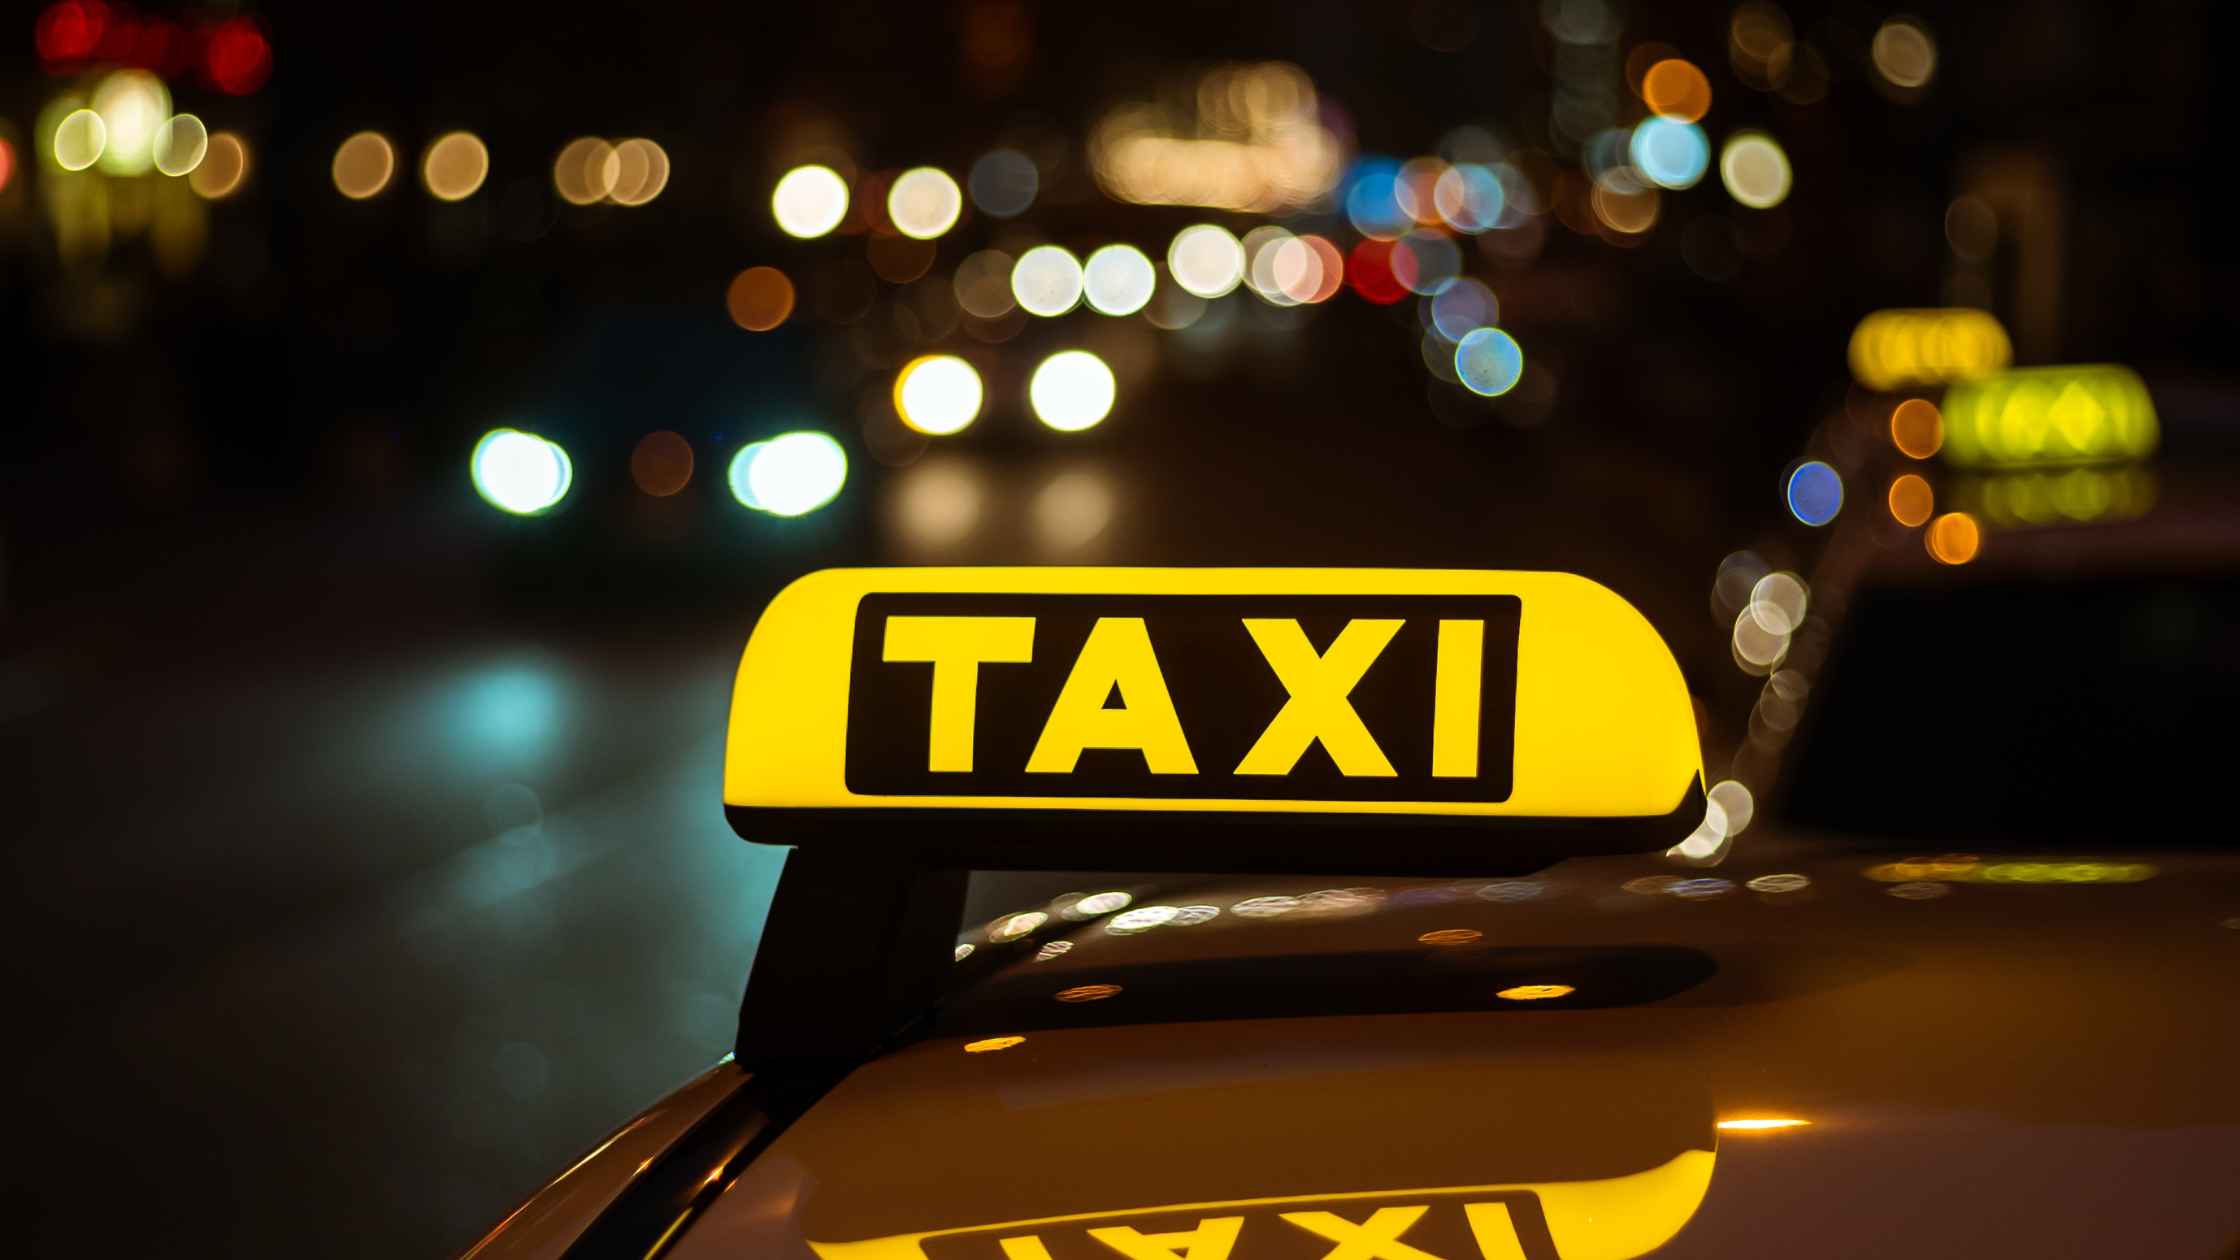 Ethiopia-Tax: New Bill Proposes a Compulsory VAT for Taxi Riders